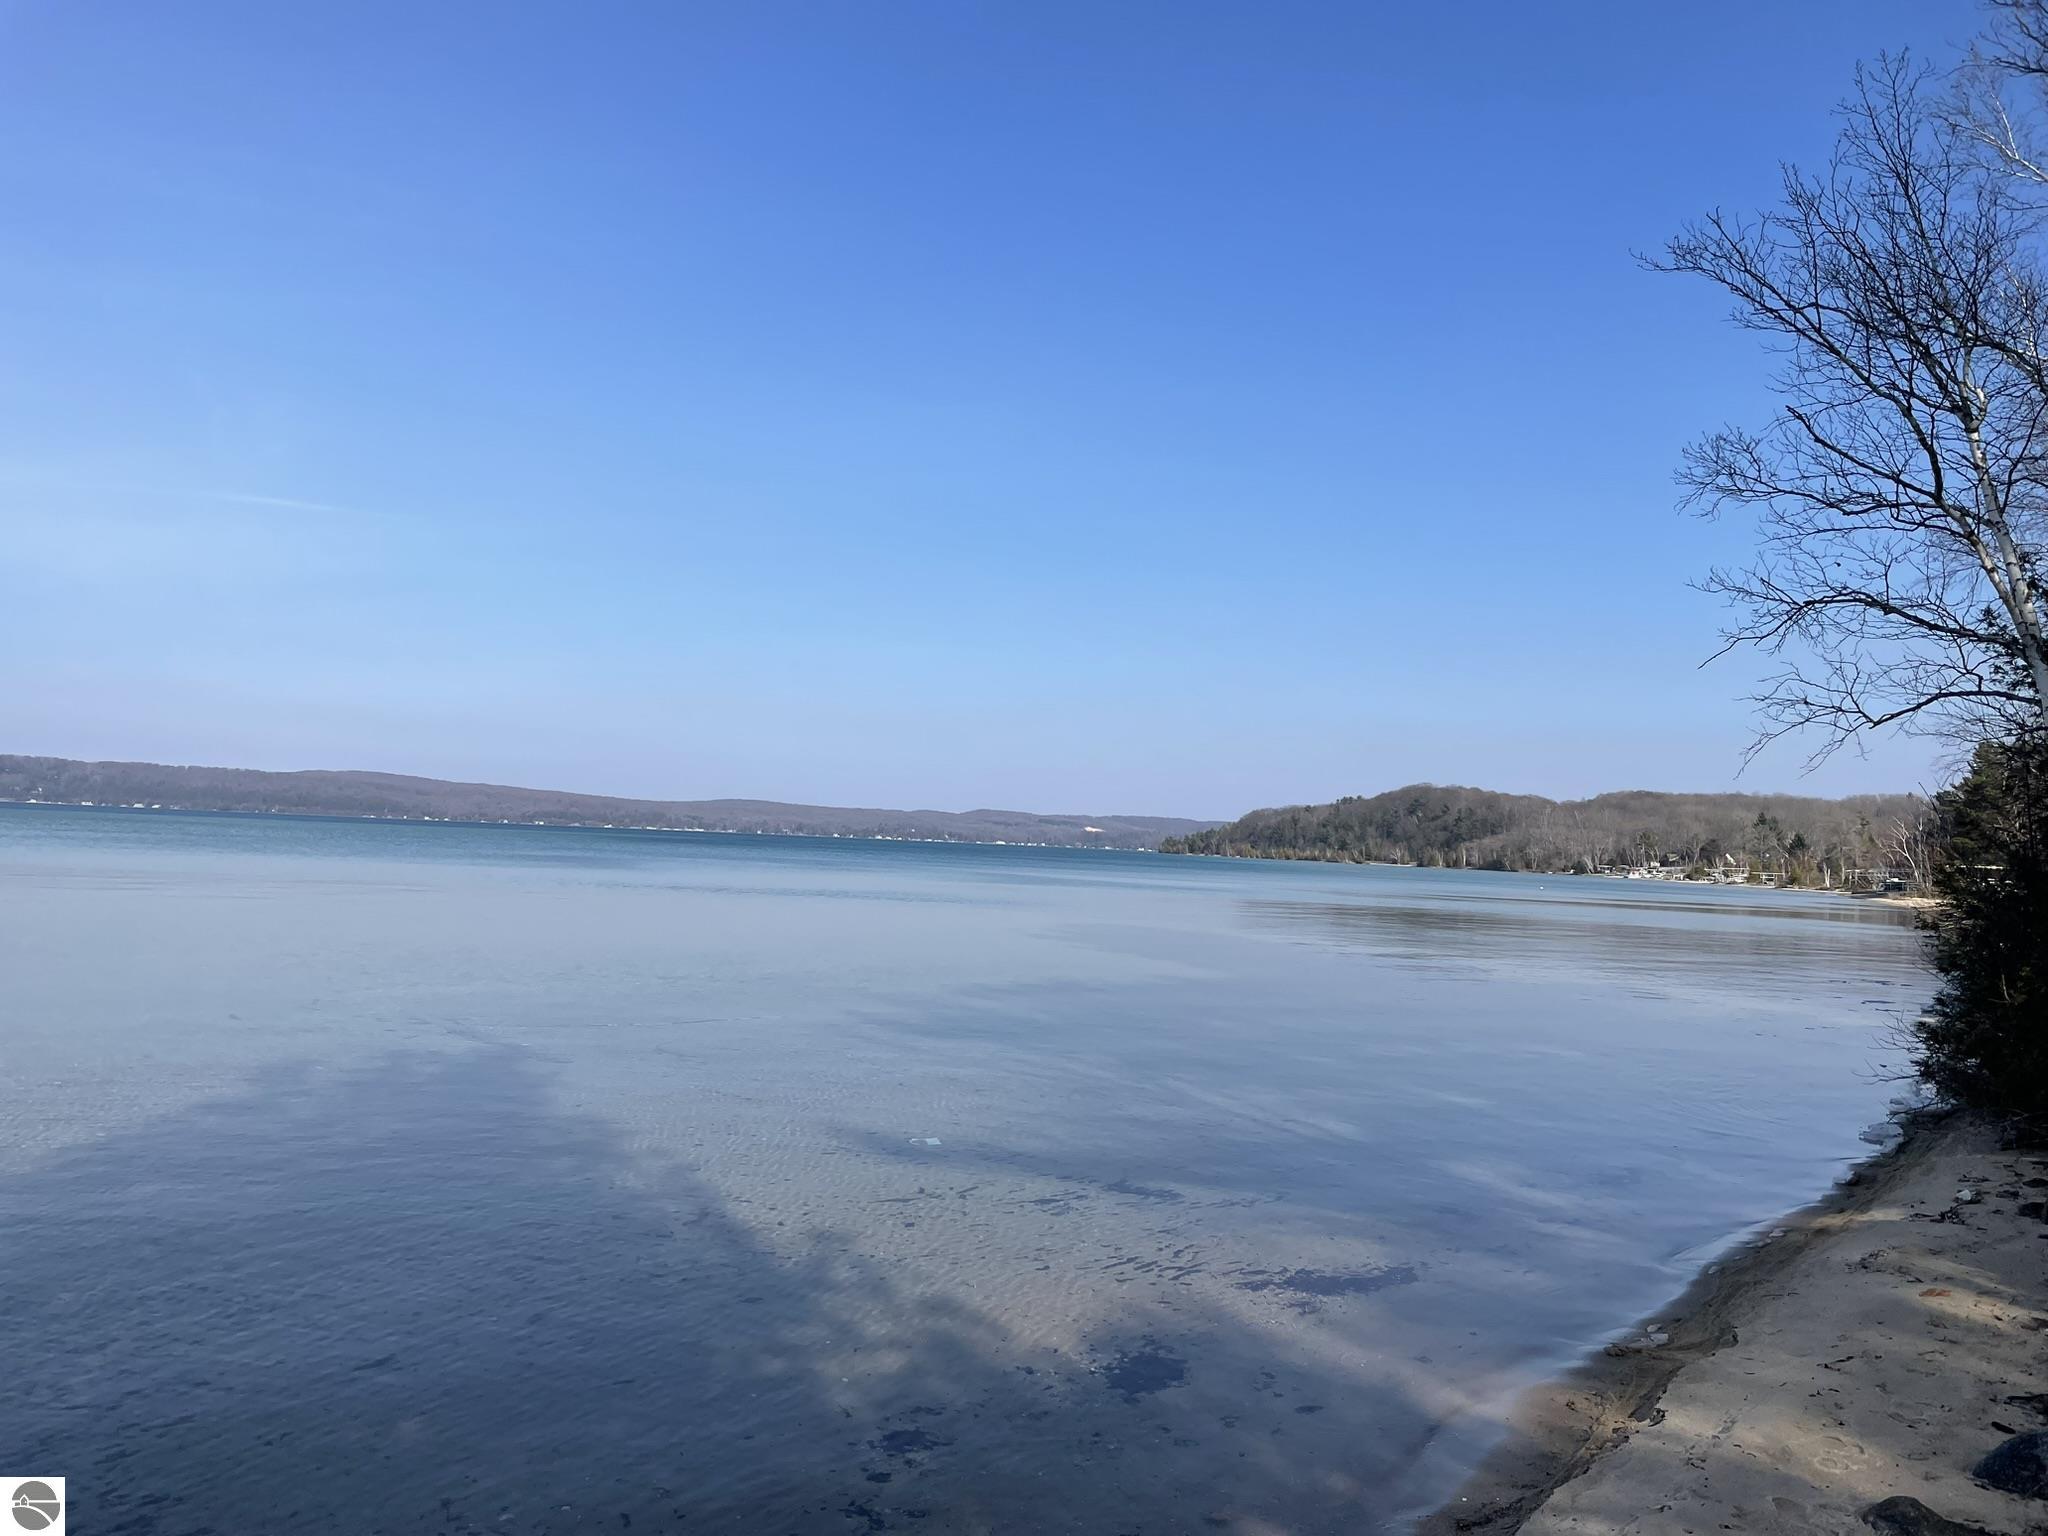 Image of Crystal Lake shared access is of the sandy shoreline, calm lake partially frozen and distant view of wooded hills lining the shore. 